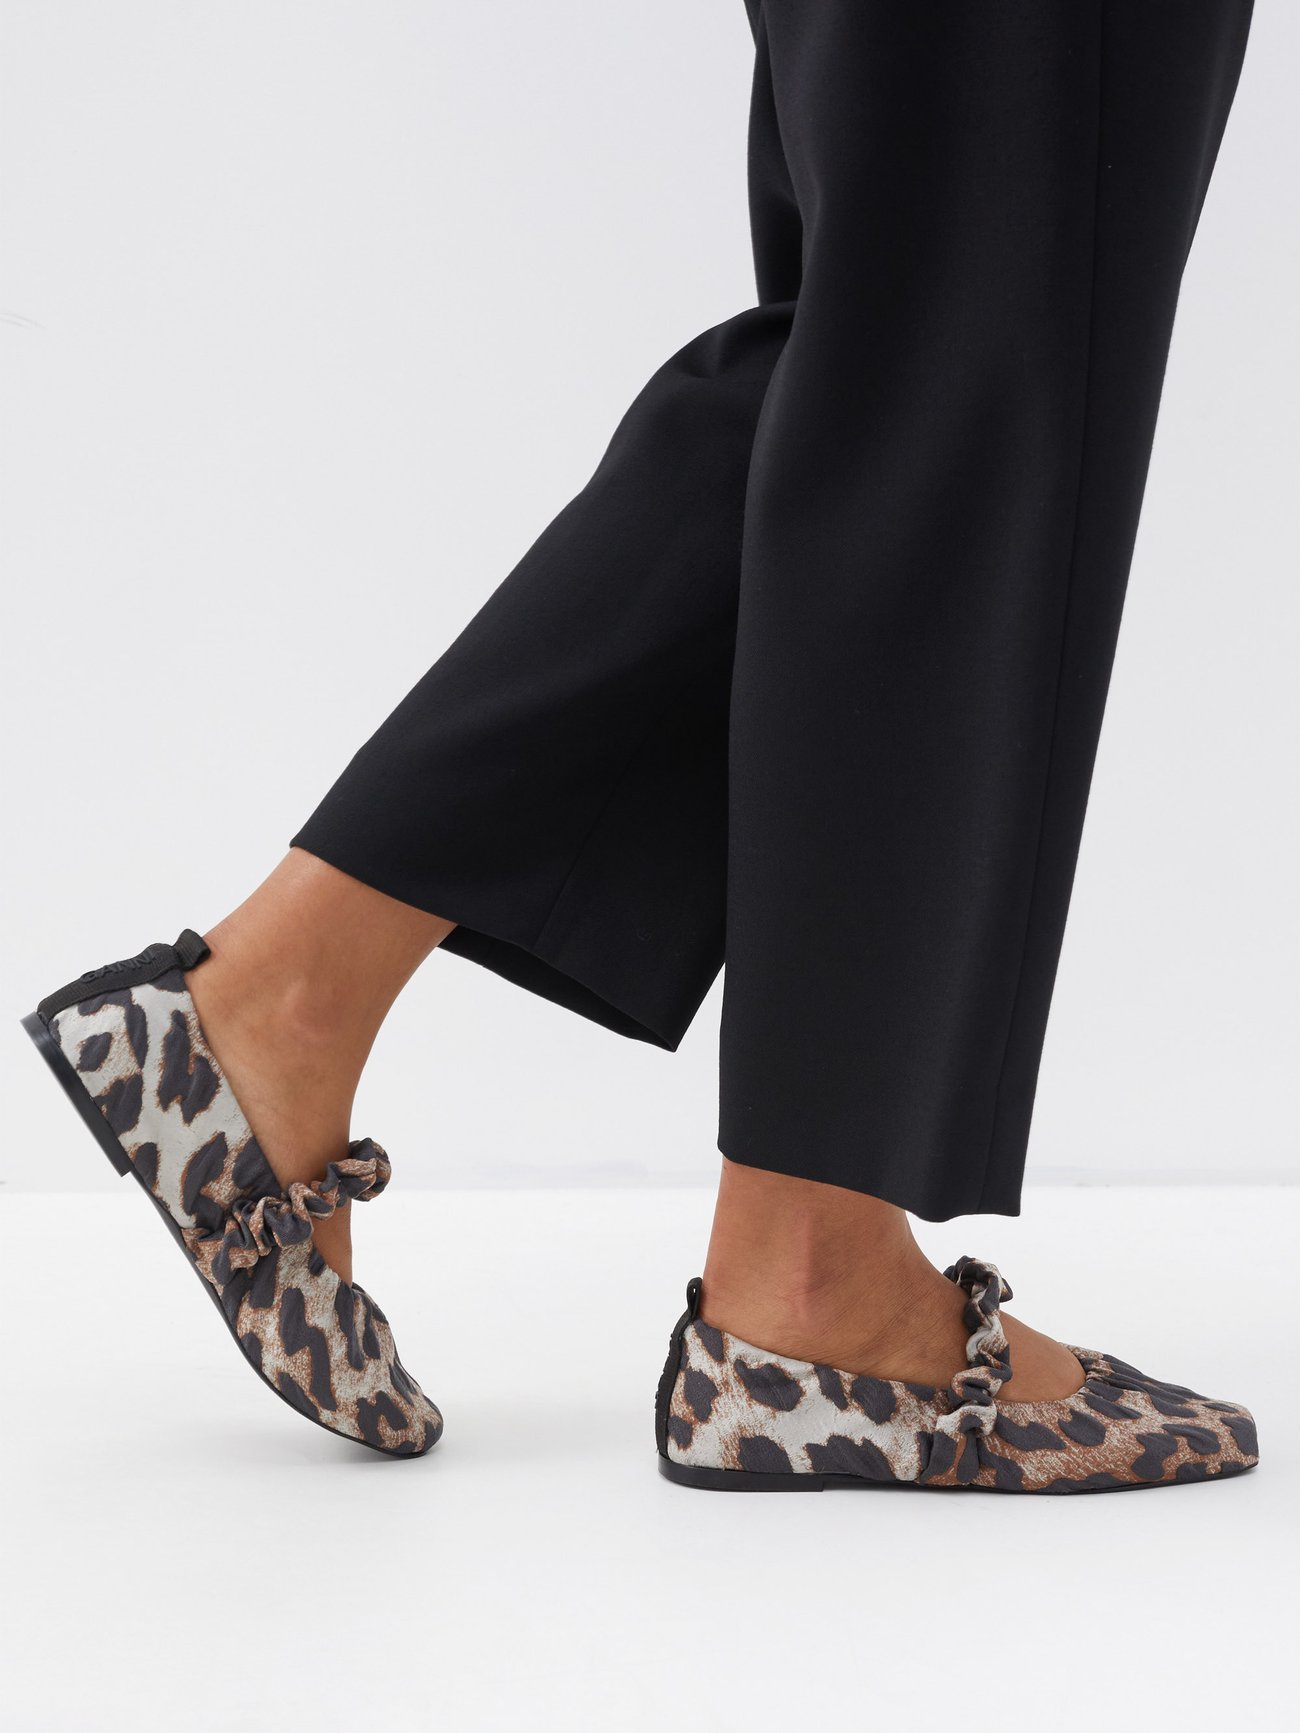 Ballet Flats are Trending Hard in 2023 & These are the Best Pairs to ...